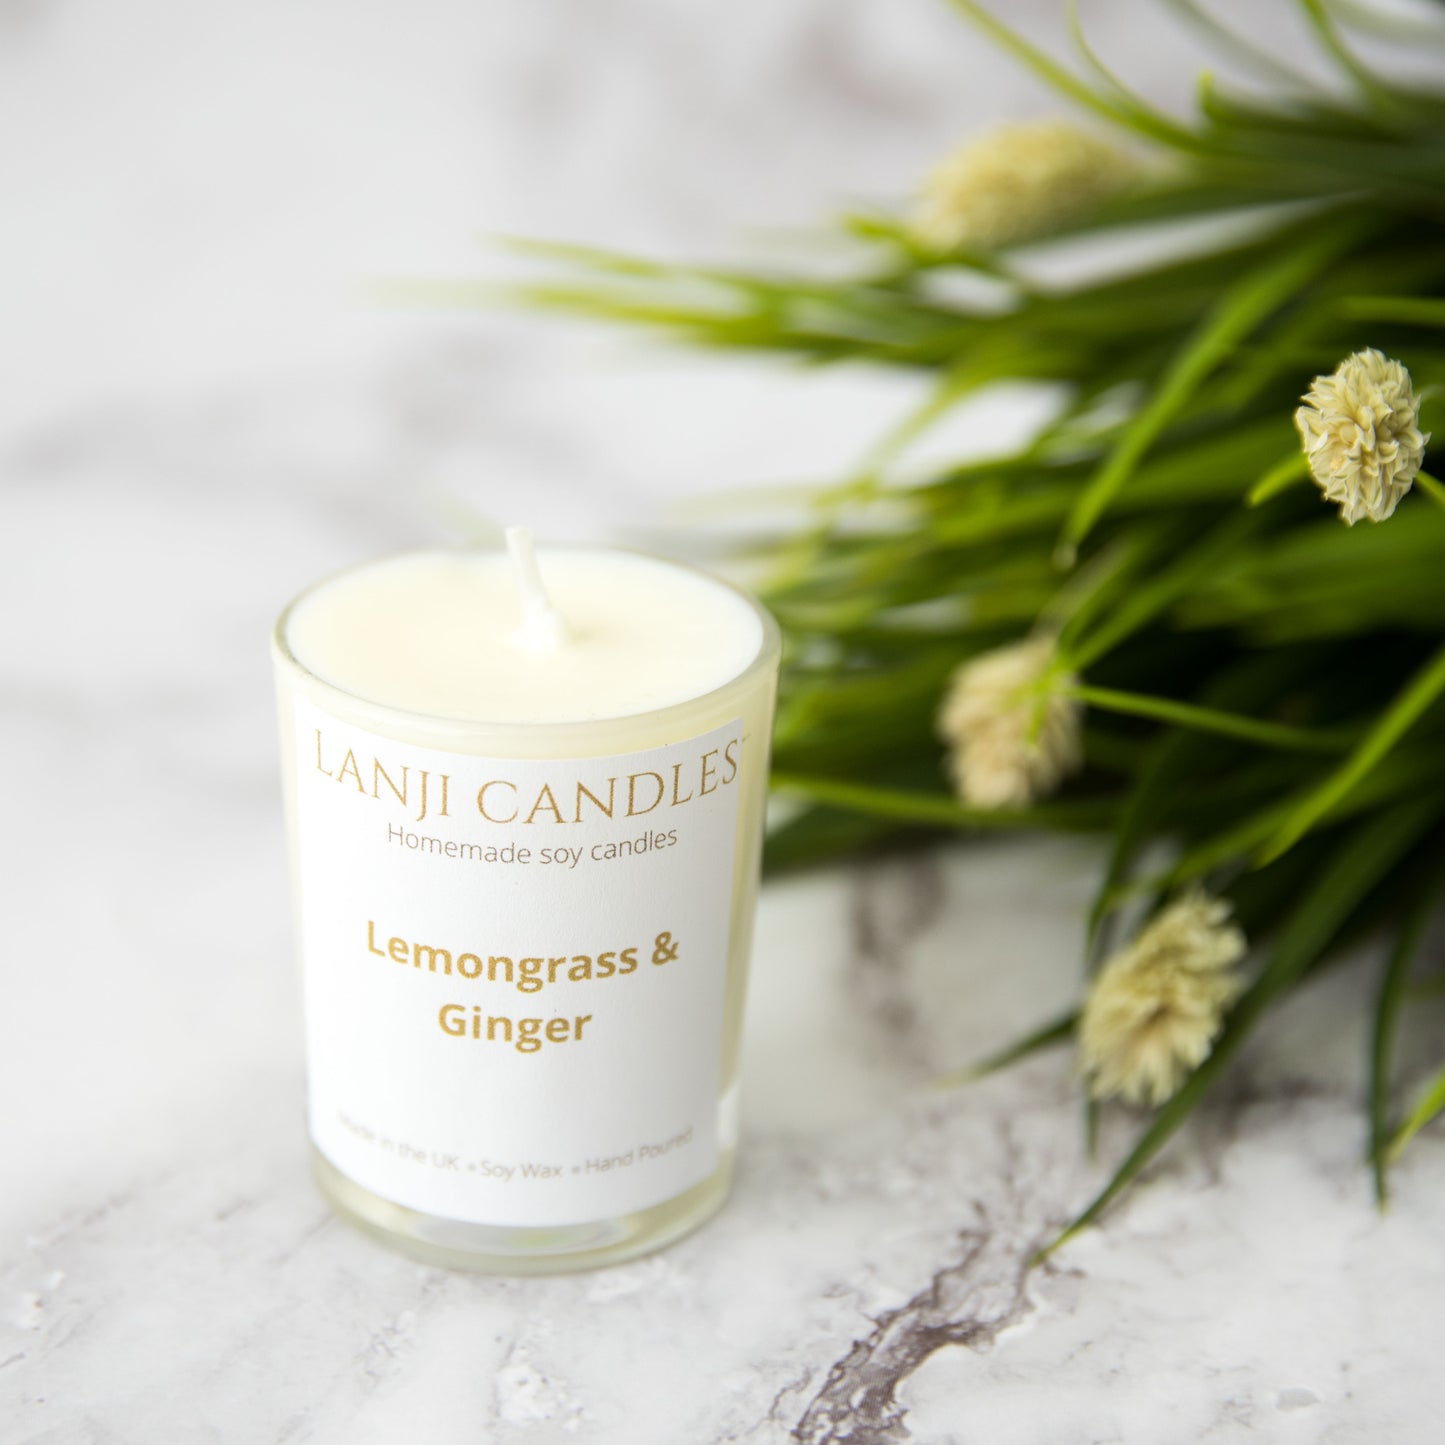 Lemongrass & Ginger Scented Soy Wax Candle